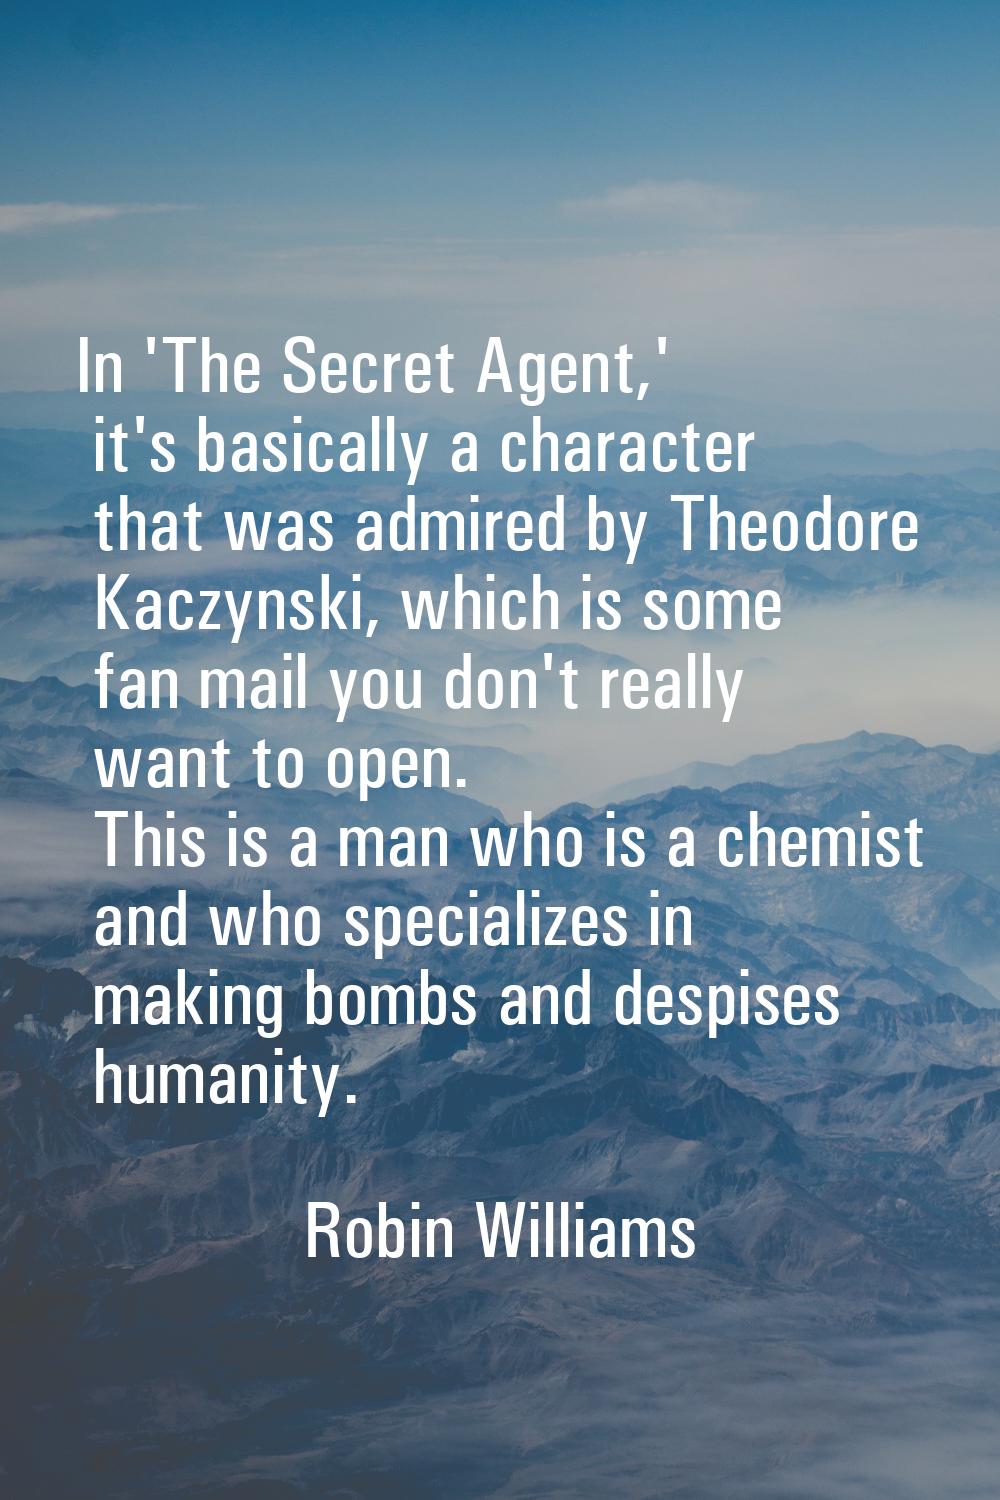 In 'The Secret Agent,' it's basically a character that was admired by Theodore Kaczynski, which is 